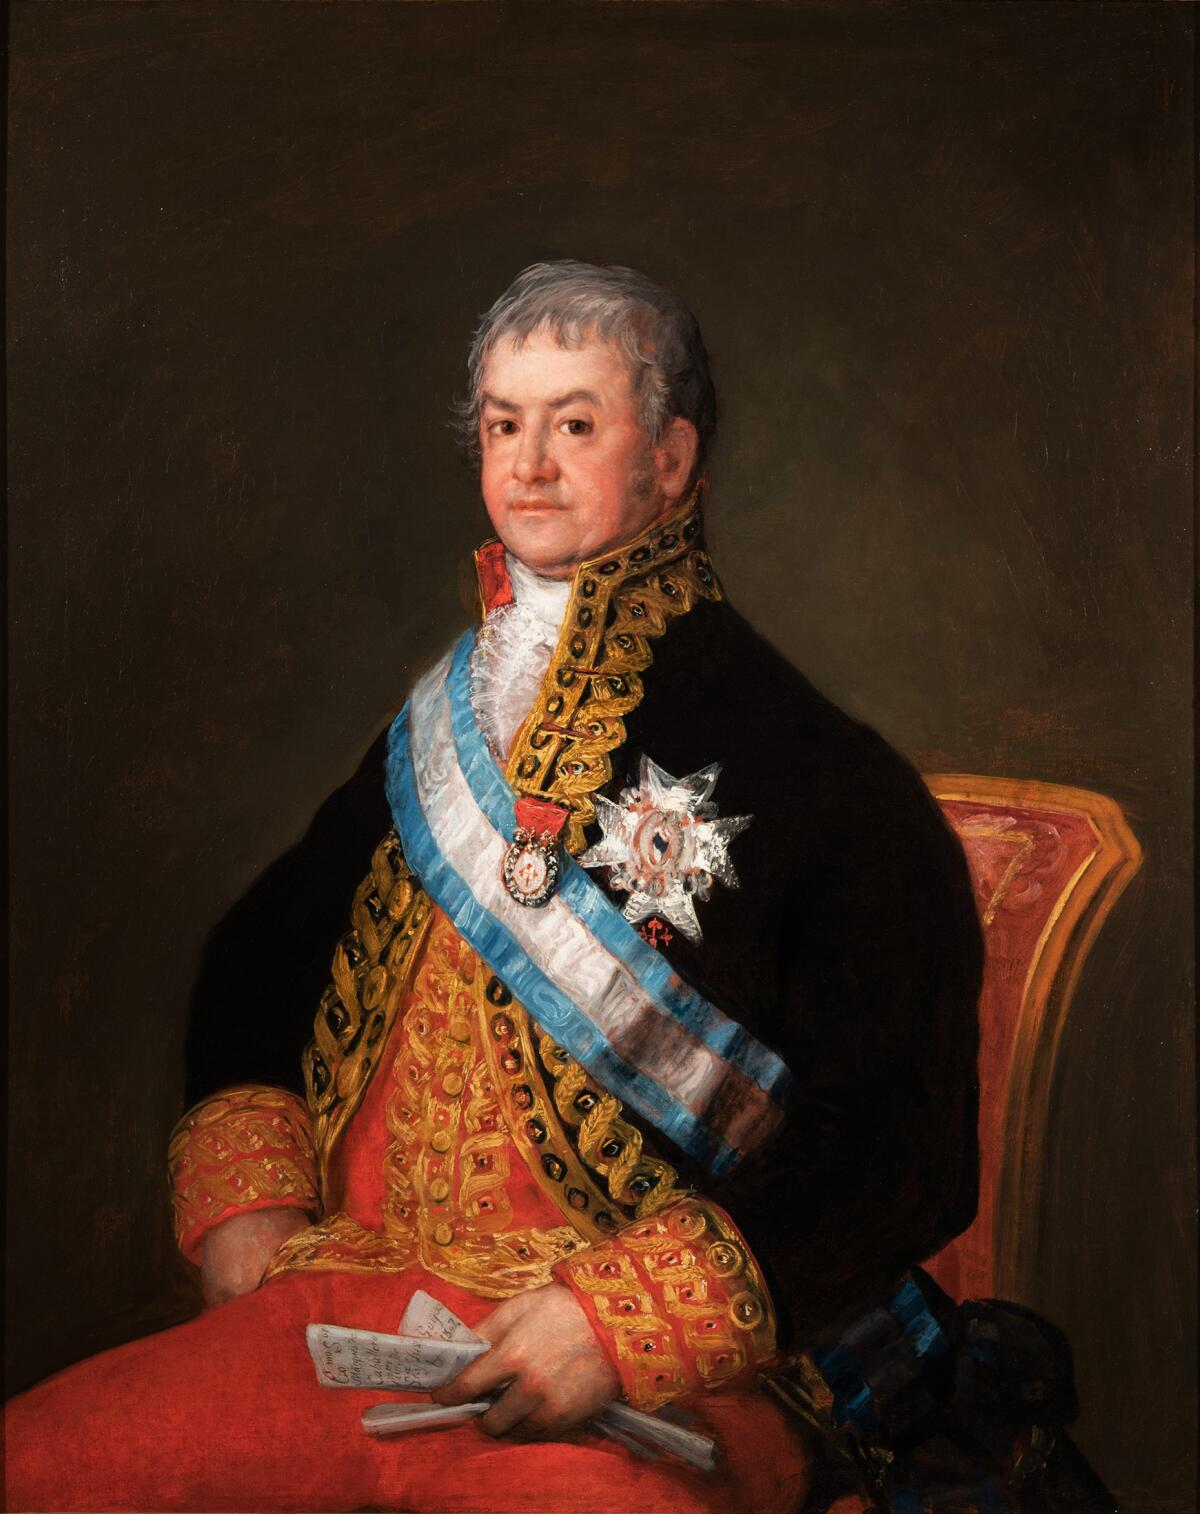 A portrait of José Antonio Caballero wearing a black jacket with gold embroidery and decorated with medals